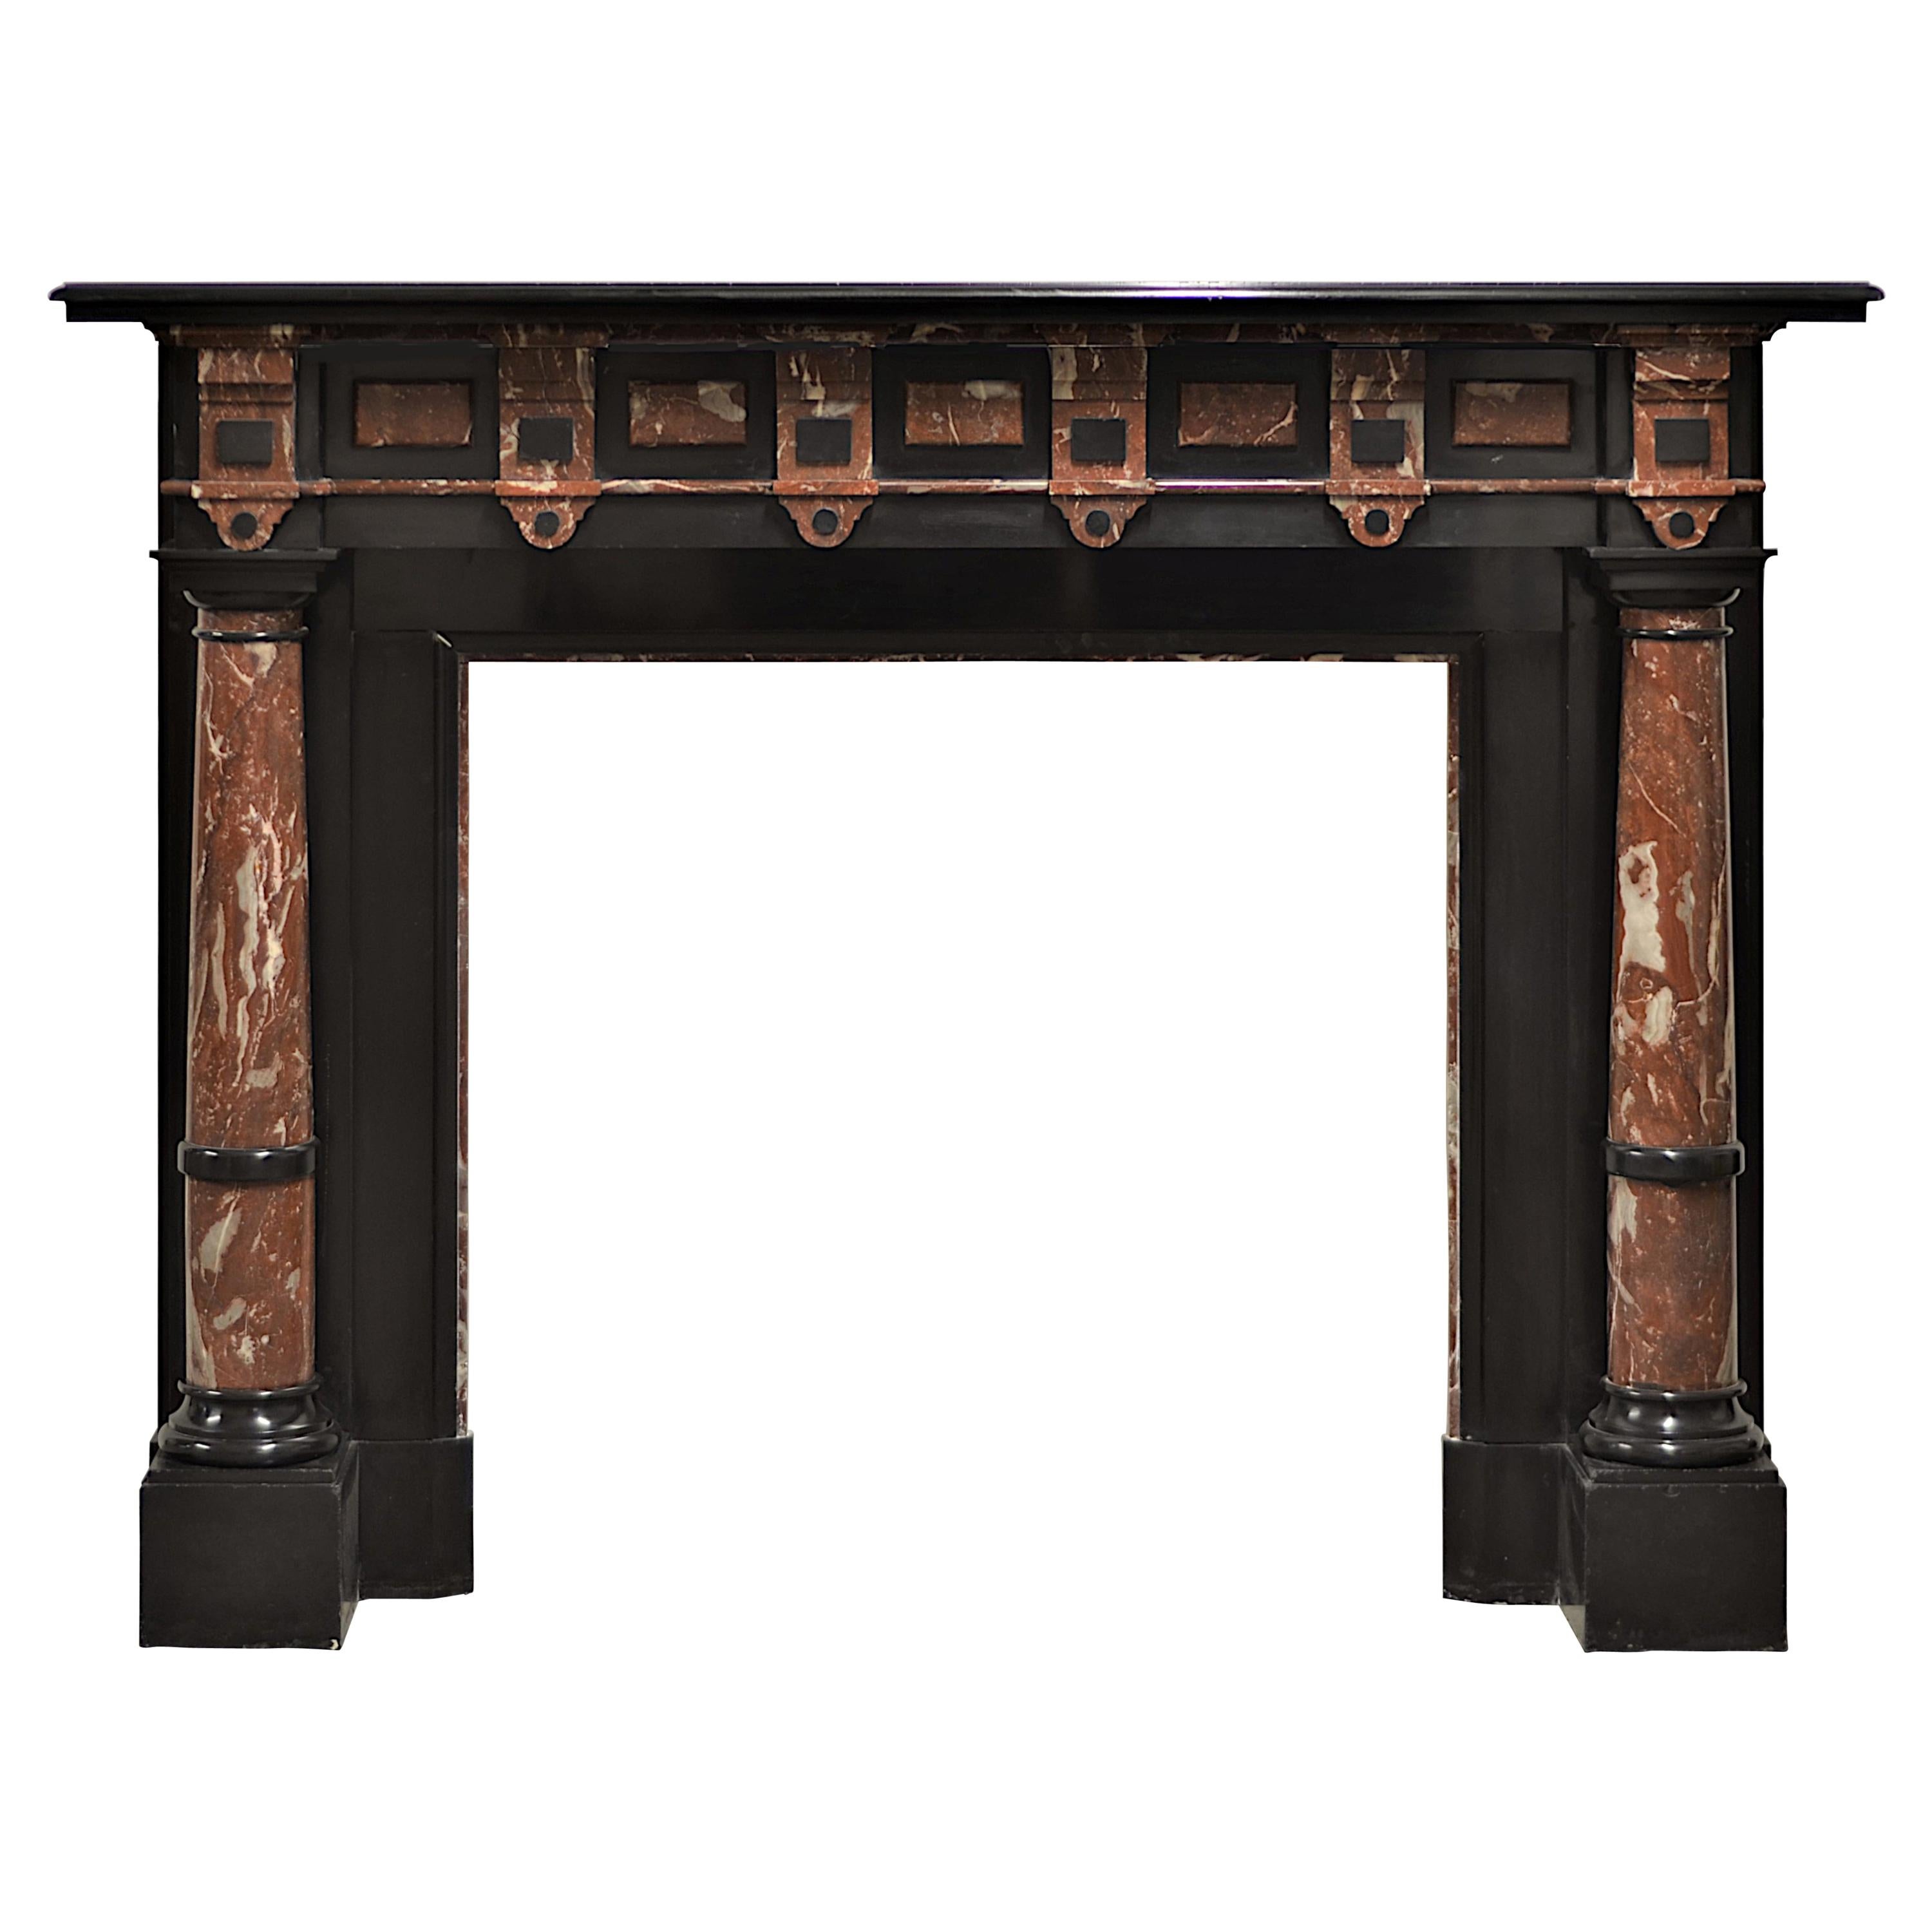 Late 19th C Black Marble Fireplace Mantel